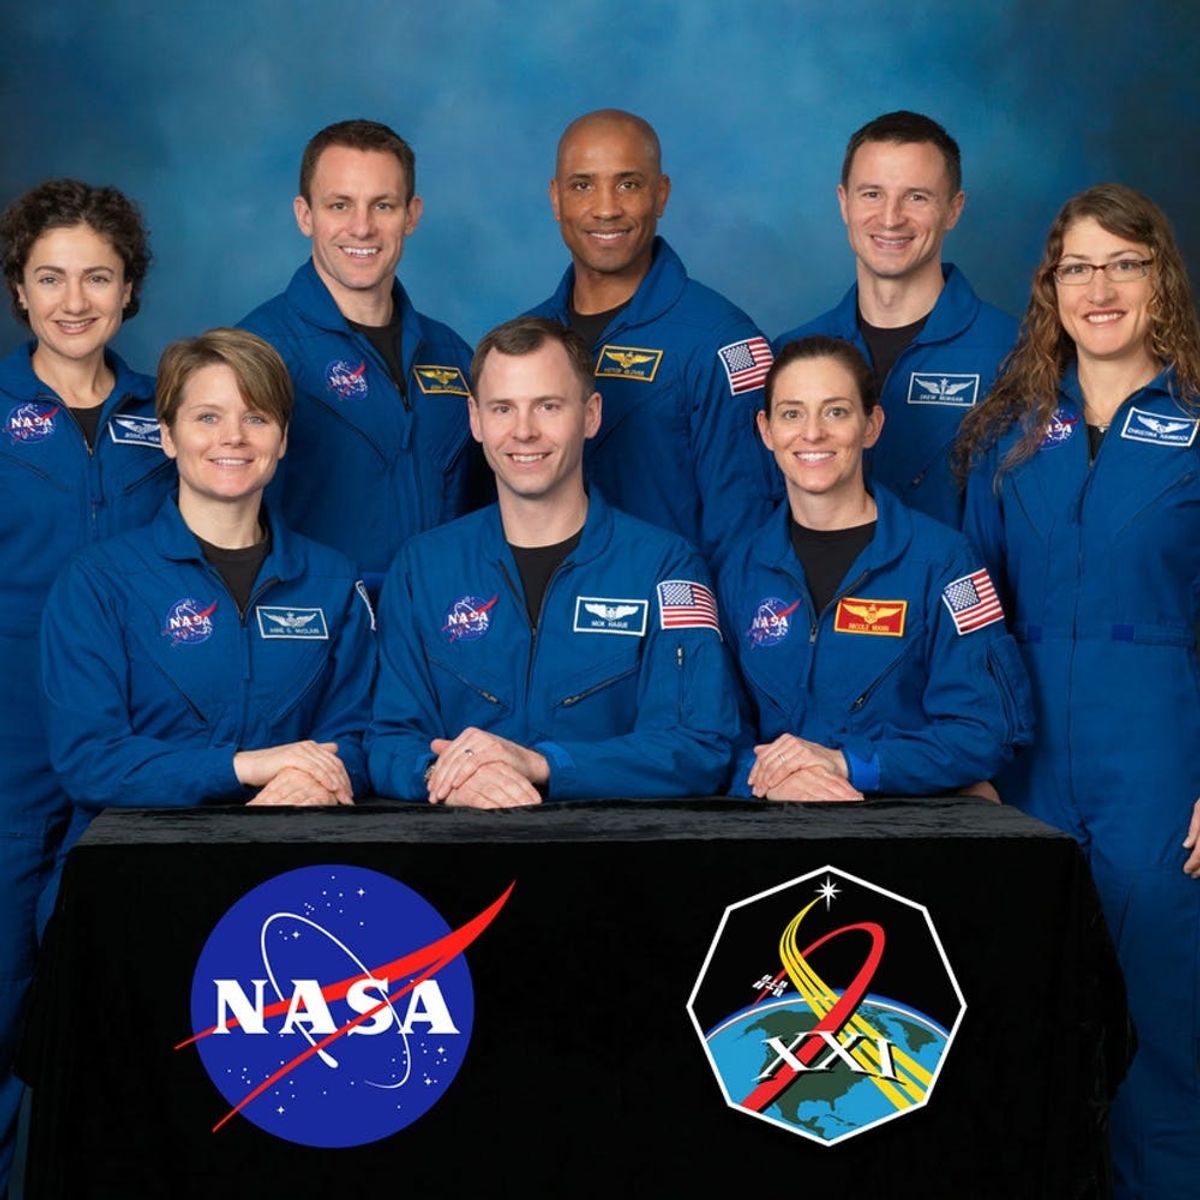 For the First Time, NASA Has as Many Women as Men in Their New Class